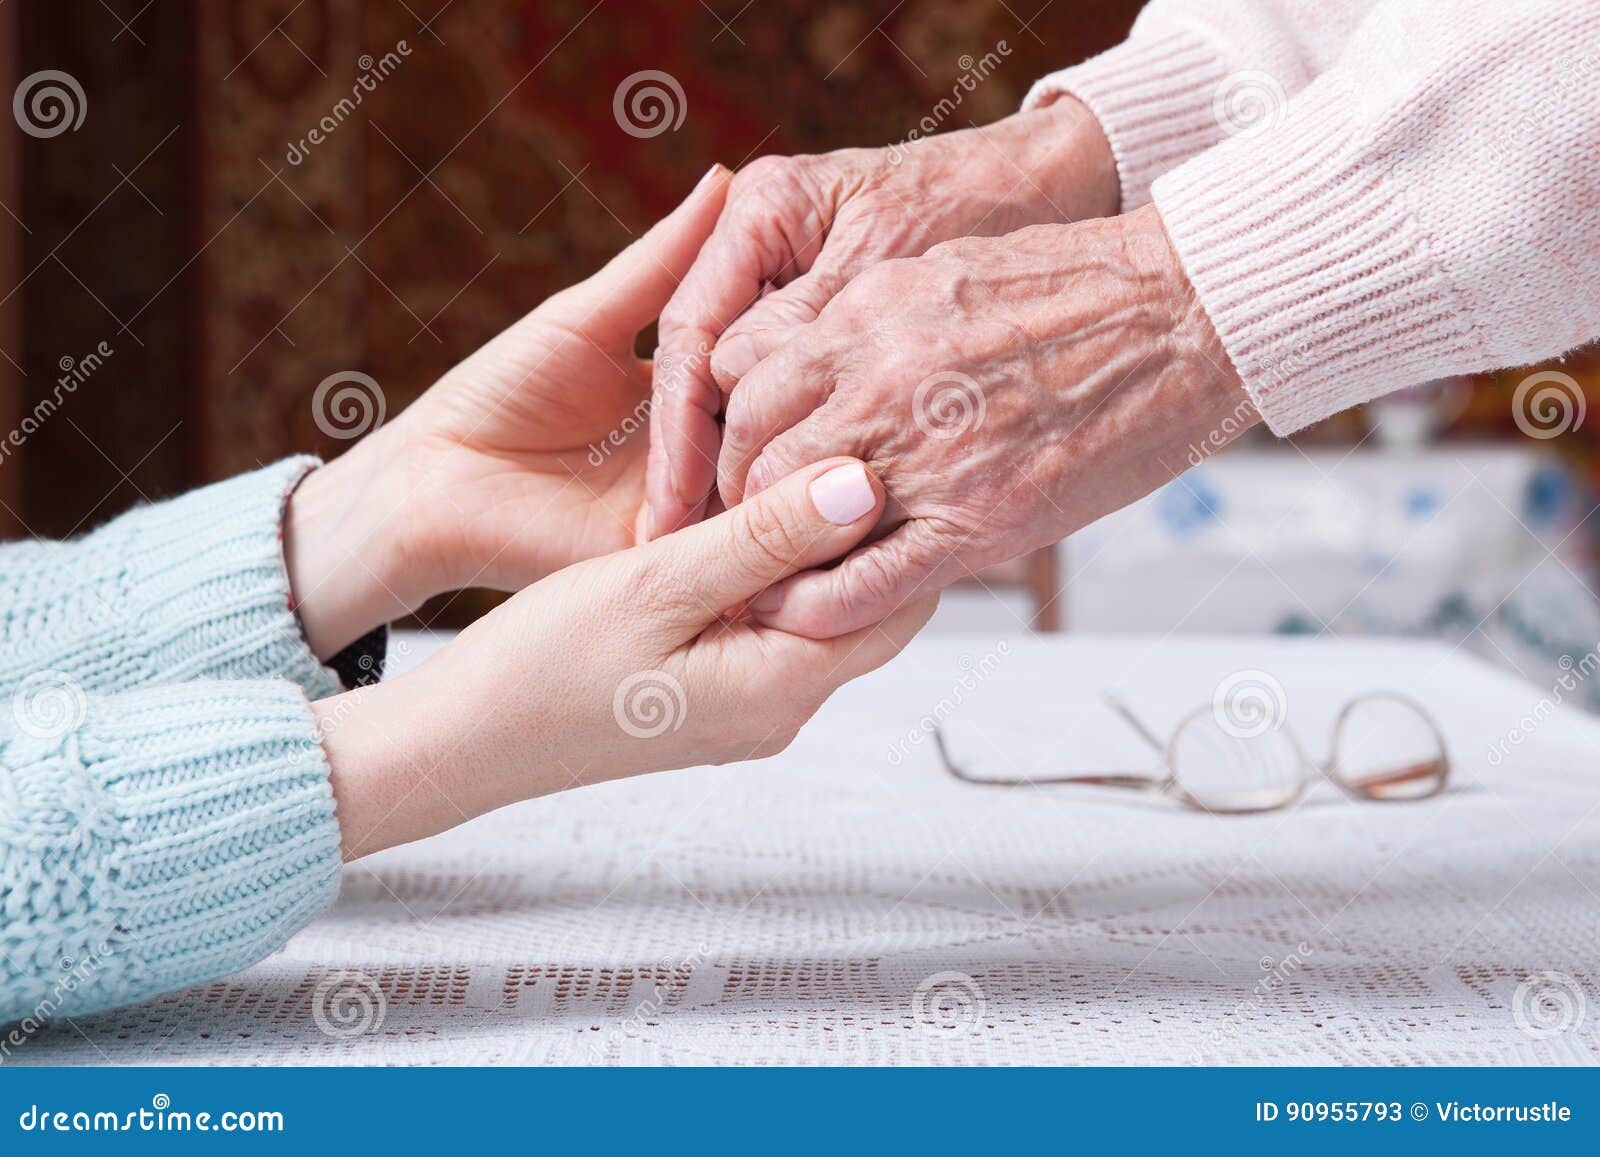 care is at home of elderly. senior woman with their caregiver at home. concept of health care for elderly old people